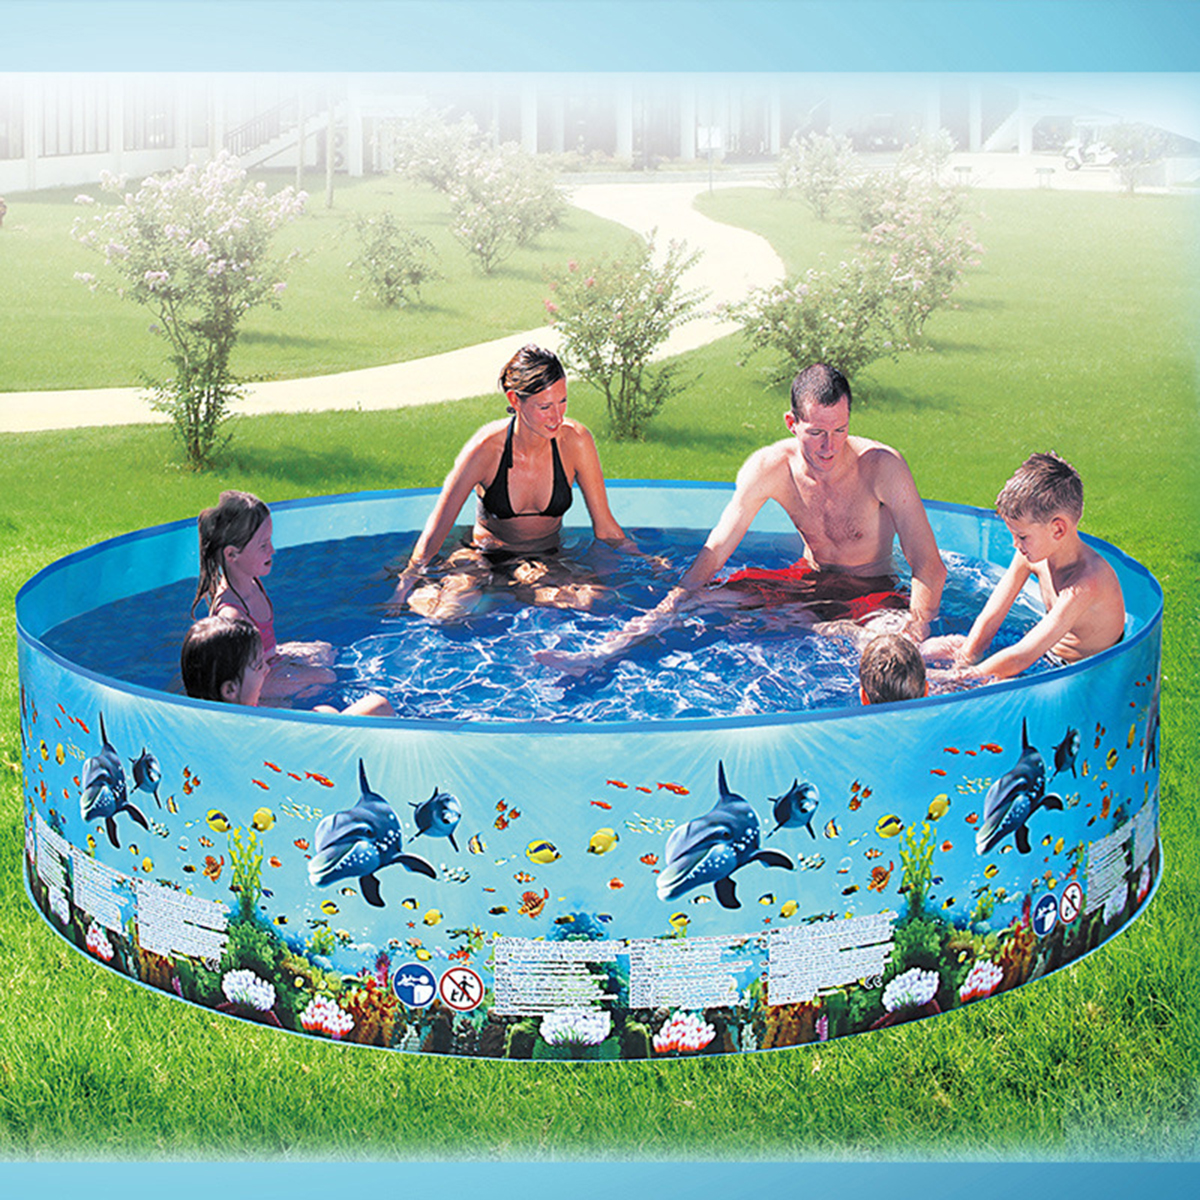 183244cm-Round-Swimming-Pool-Home-Use-Garden-Paddling-Pool-Non-inflatable-Children-Bathing-Tub-Kids--1715065-2